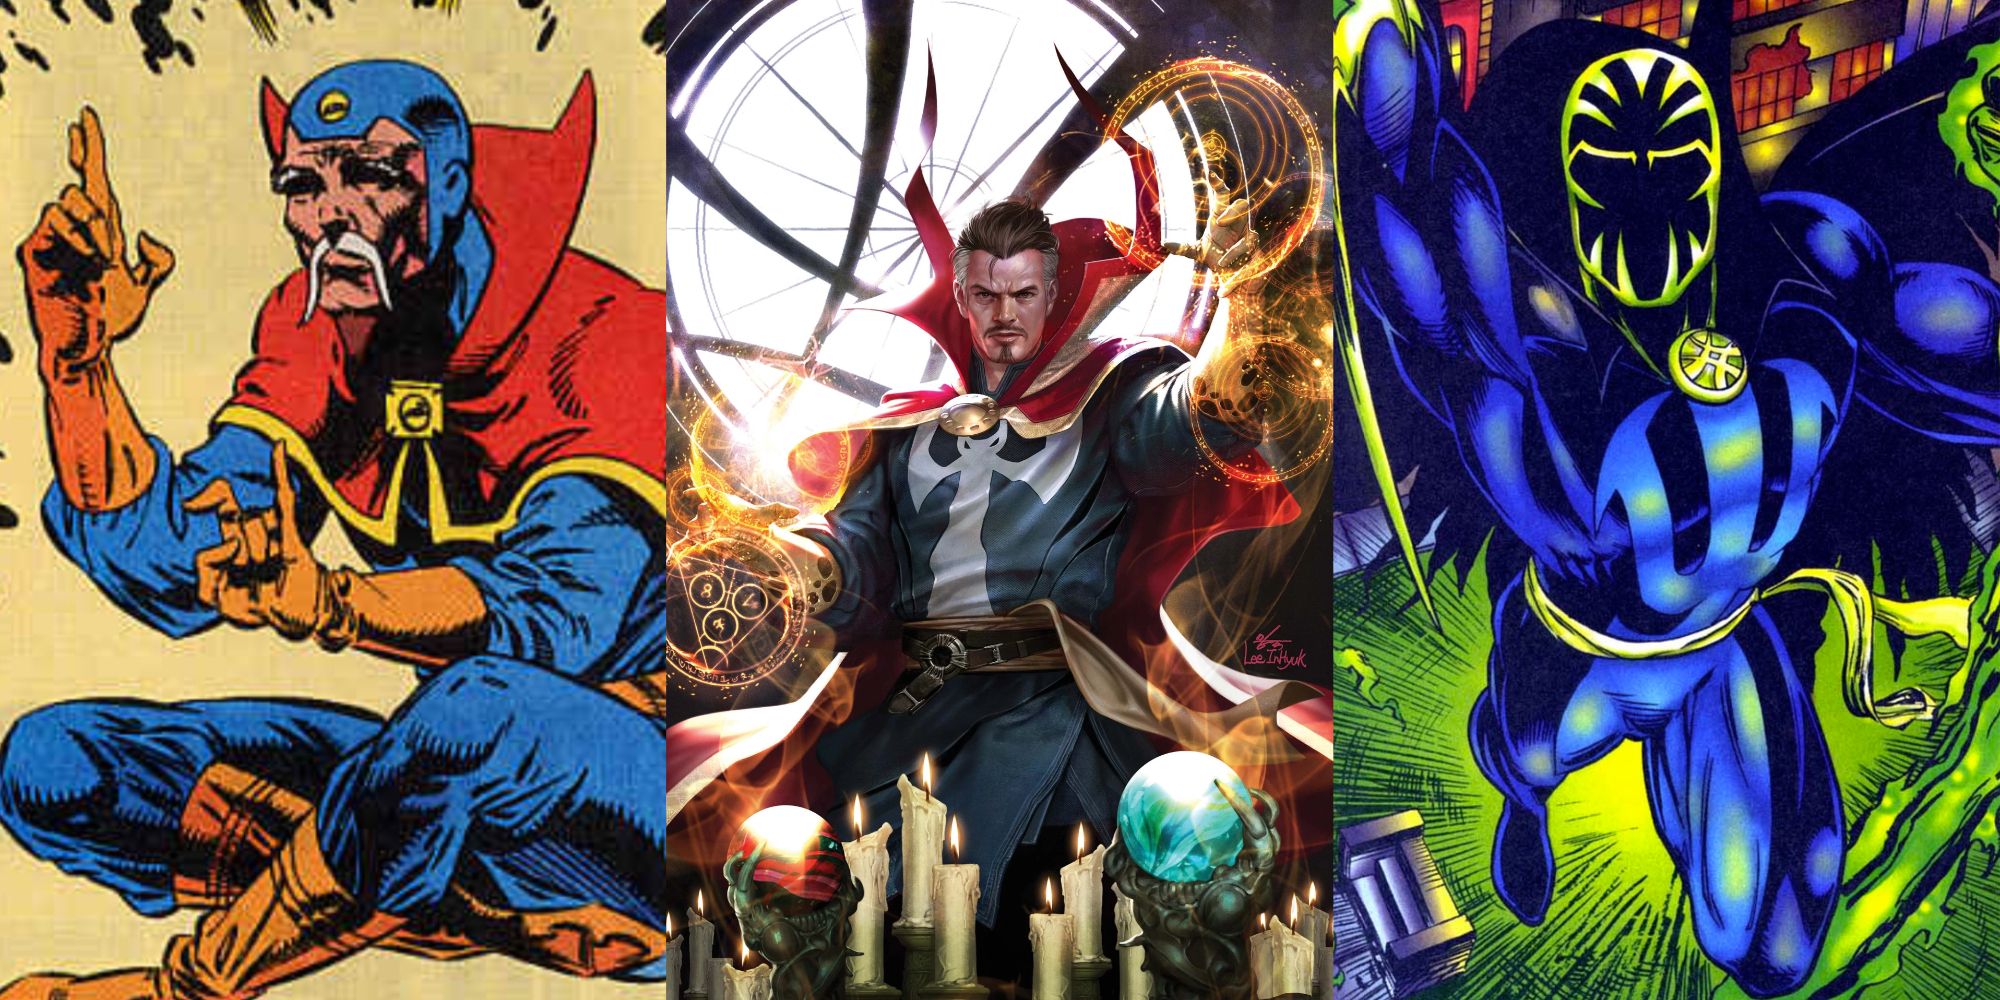 Split image of The Ancient One from the 31st century, Doctor Strange, and Paradox from Marvel Comics.